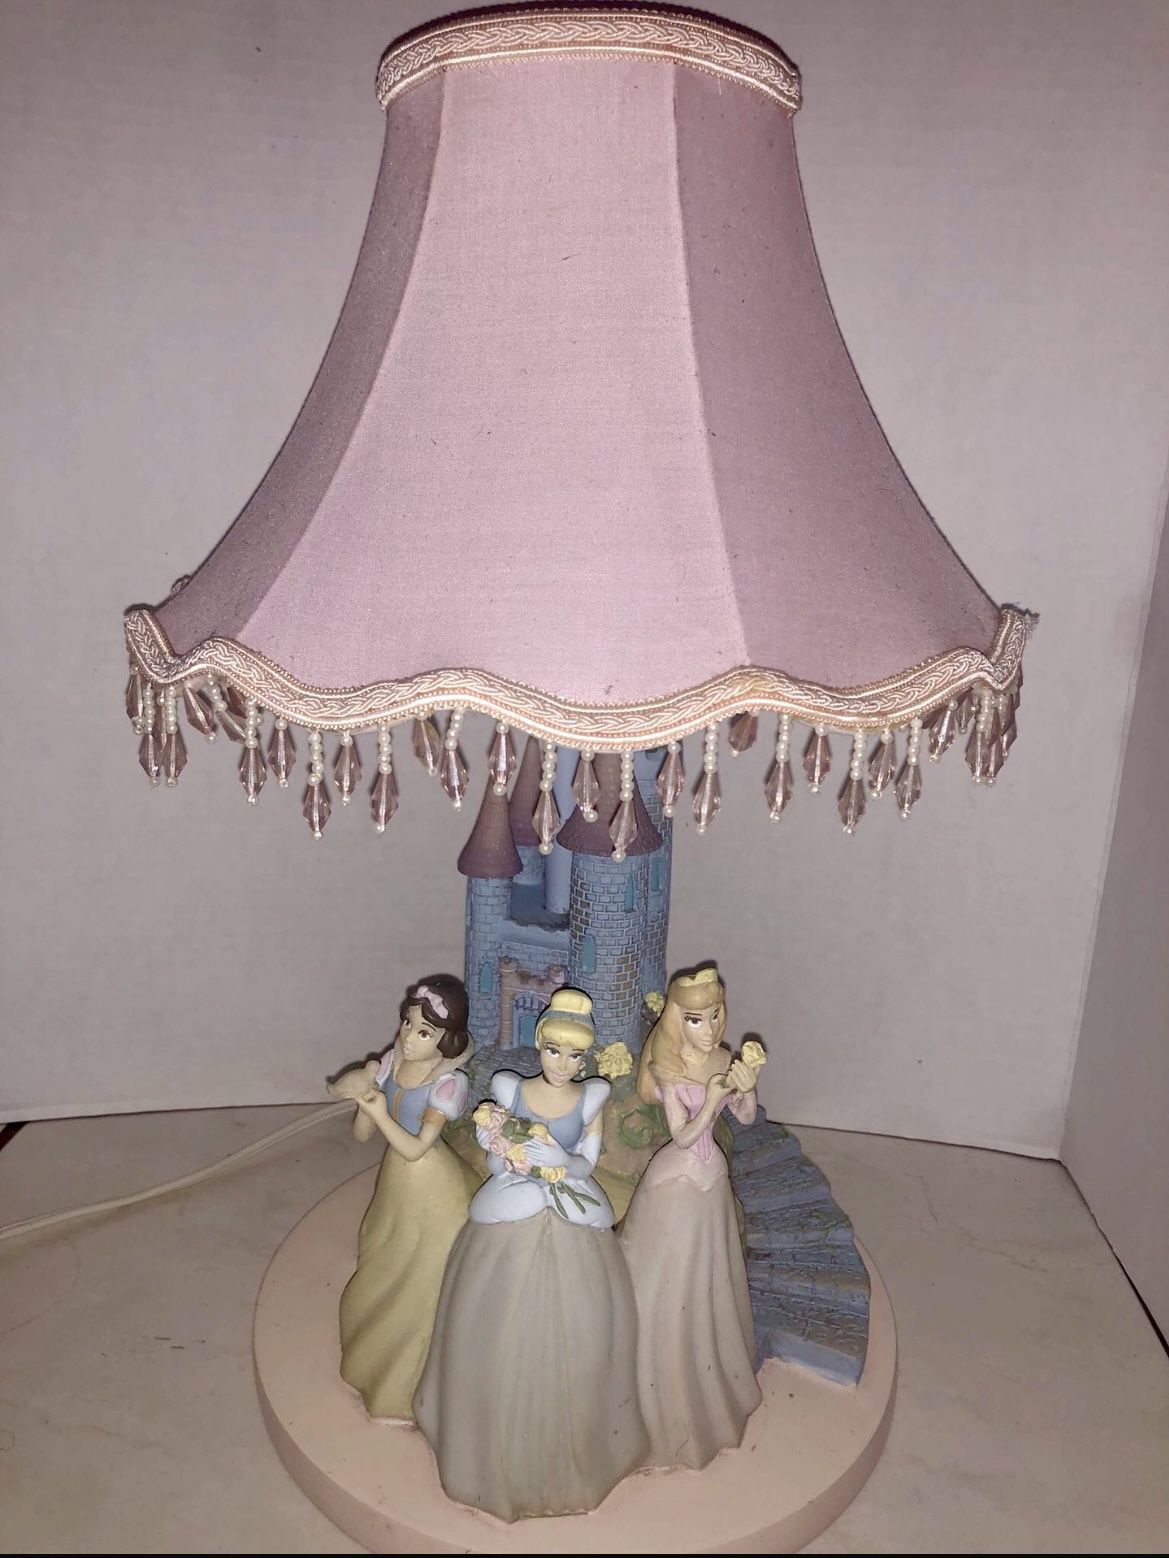 Disney Princess Table Top Lamp feat. Snow White, Cinderella and Sleeping